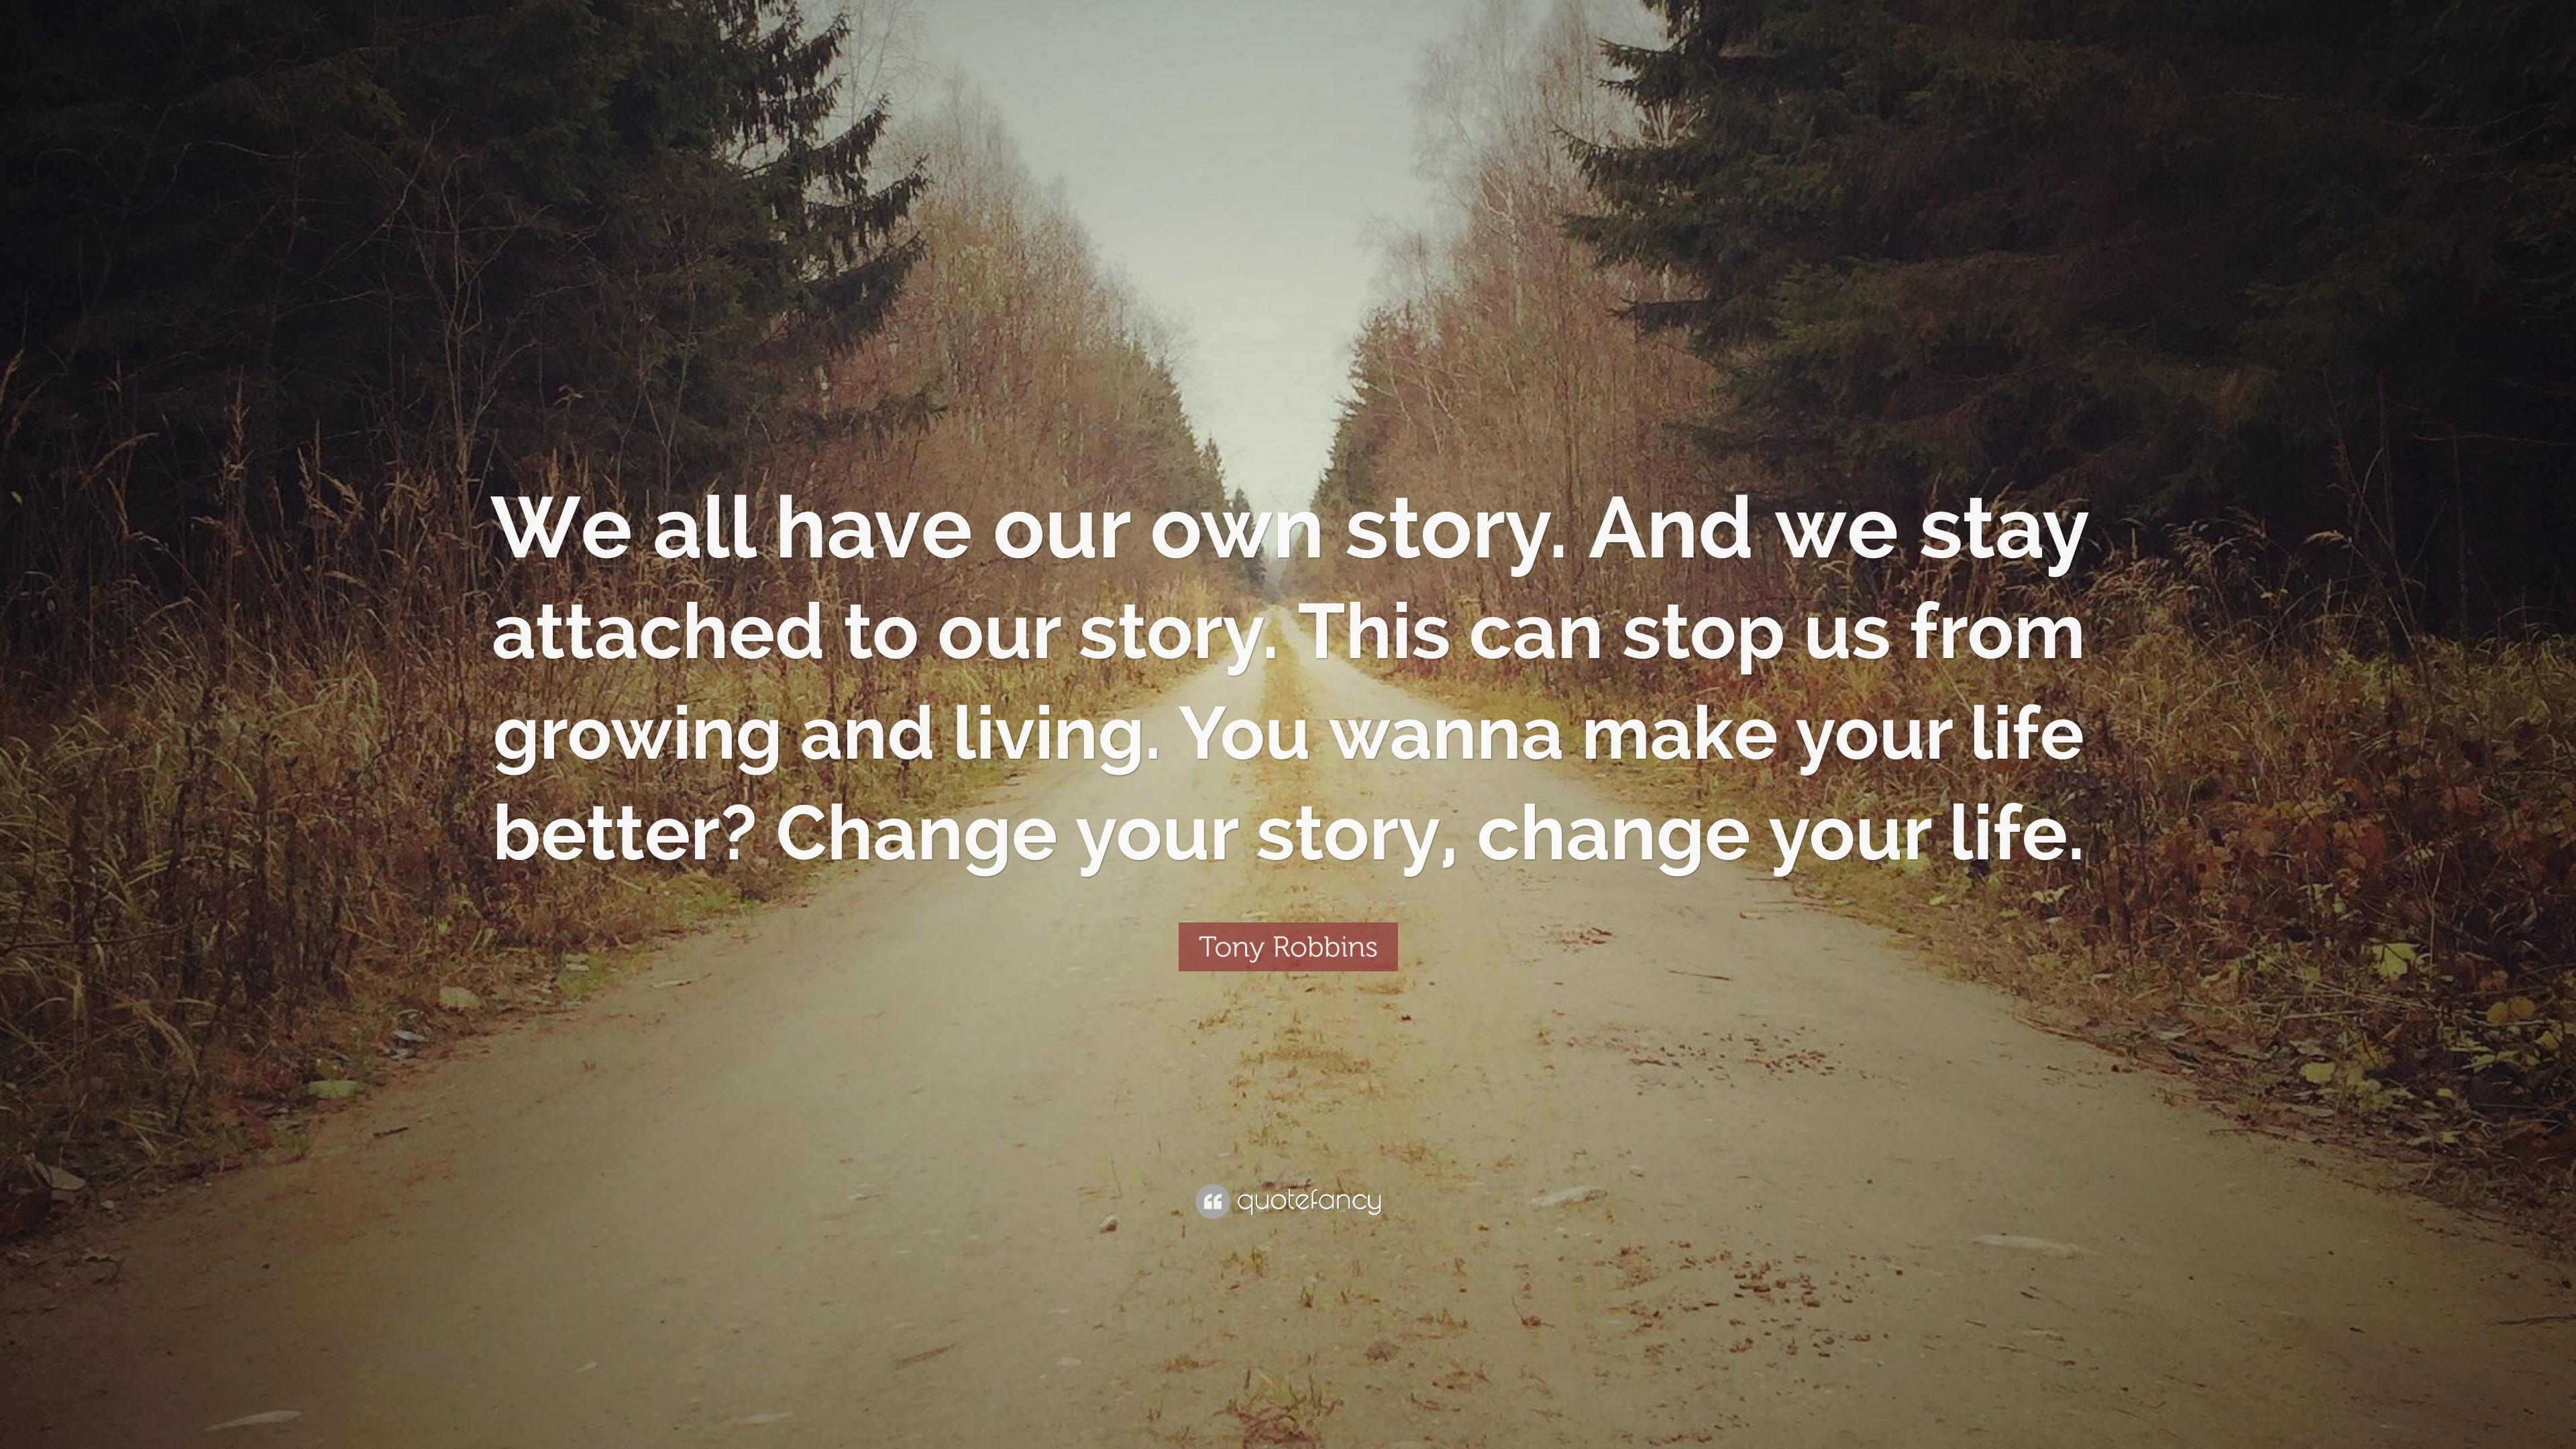 About Us, Our Story